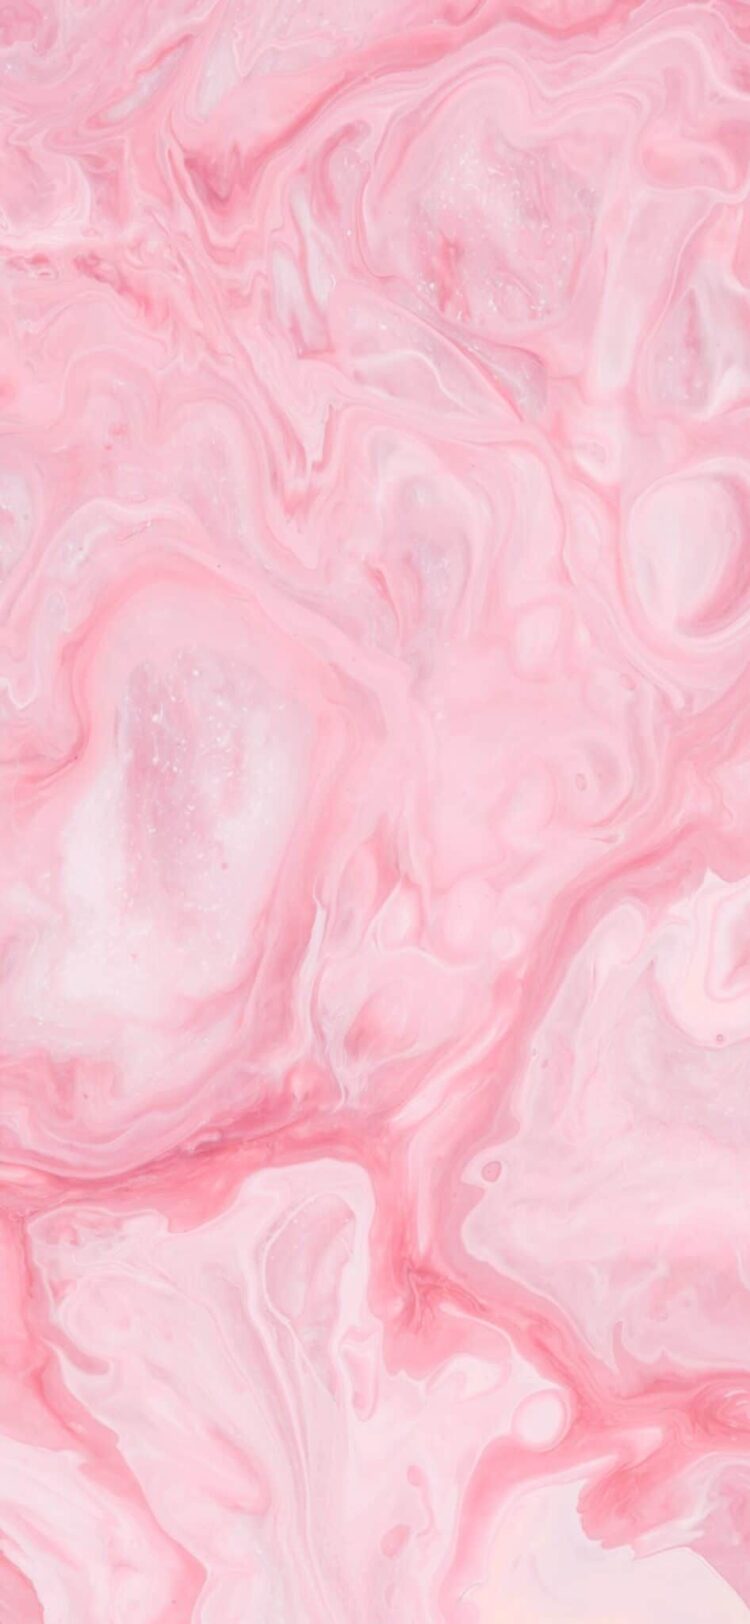 100 Pink Aesthetic Wallpaper Backgrounds You Need For Your Phone Right Now!